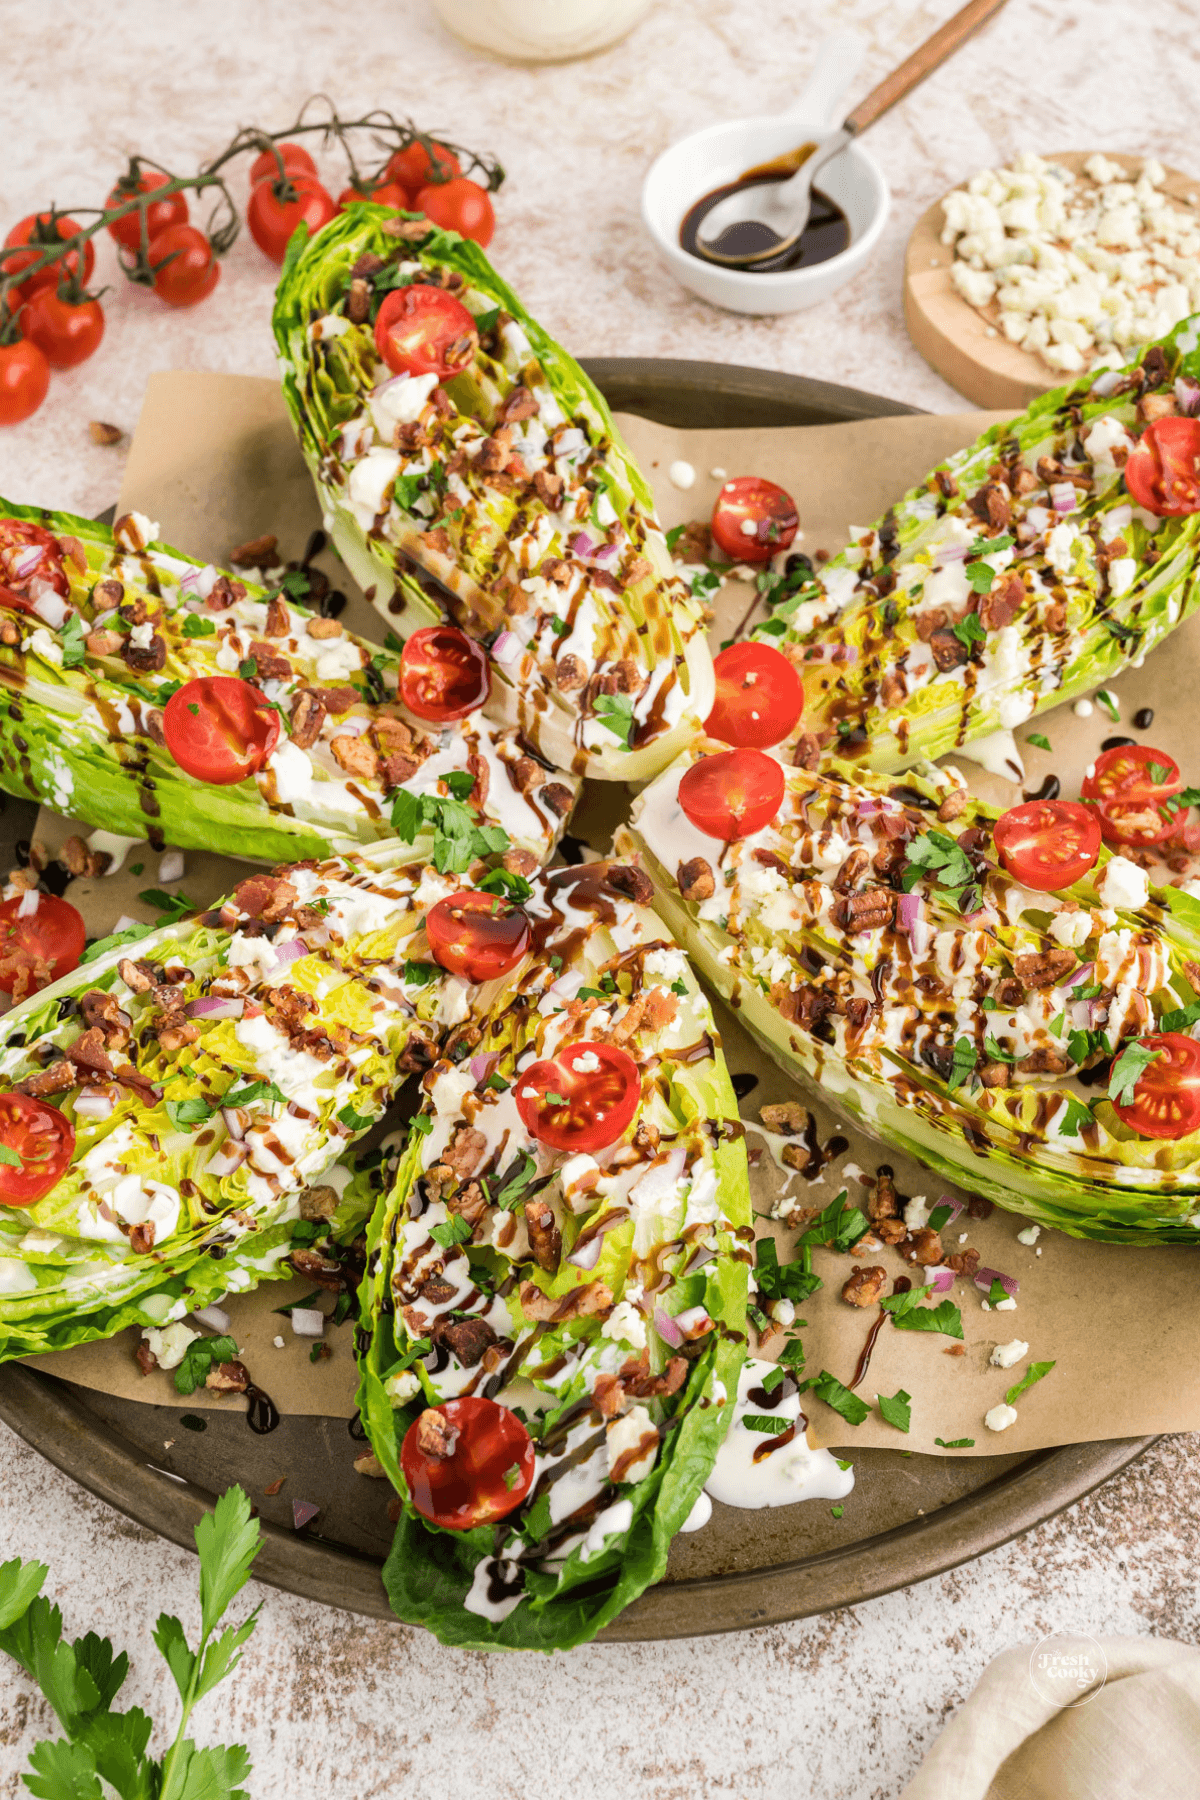 Romaine wedges dressed with blue cheese dressing, blue cheese crumbles, tomatoes, bacon bits, pecans and drizzled with balsamic glaze.